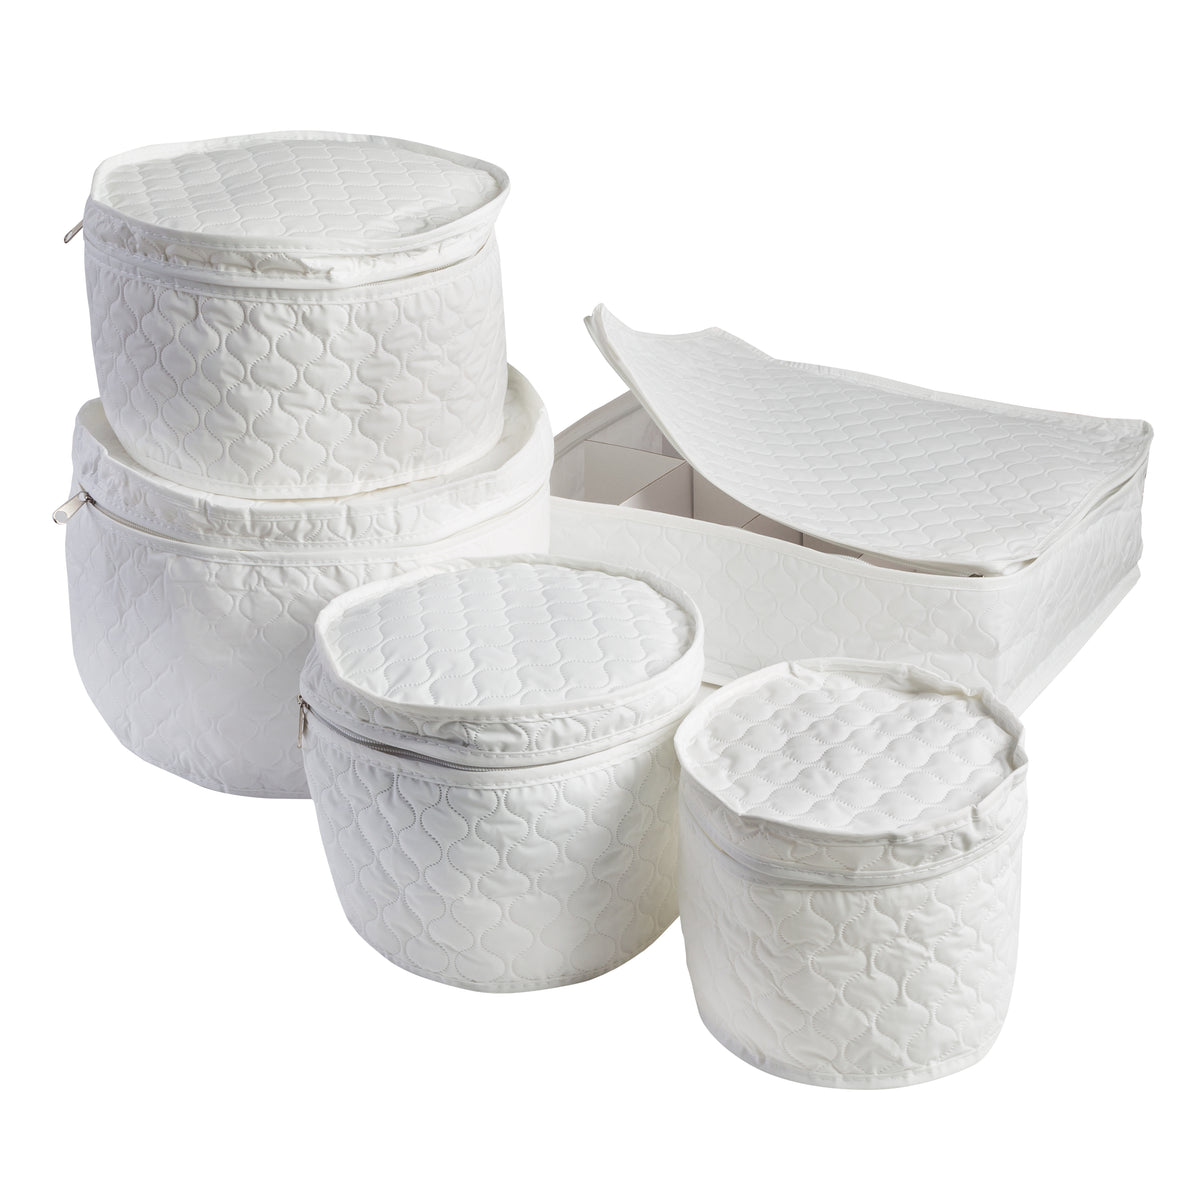 Honey Can Do Round Dinnerware Storage Boxes, Set of 3 - Natural